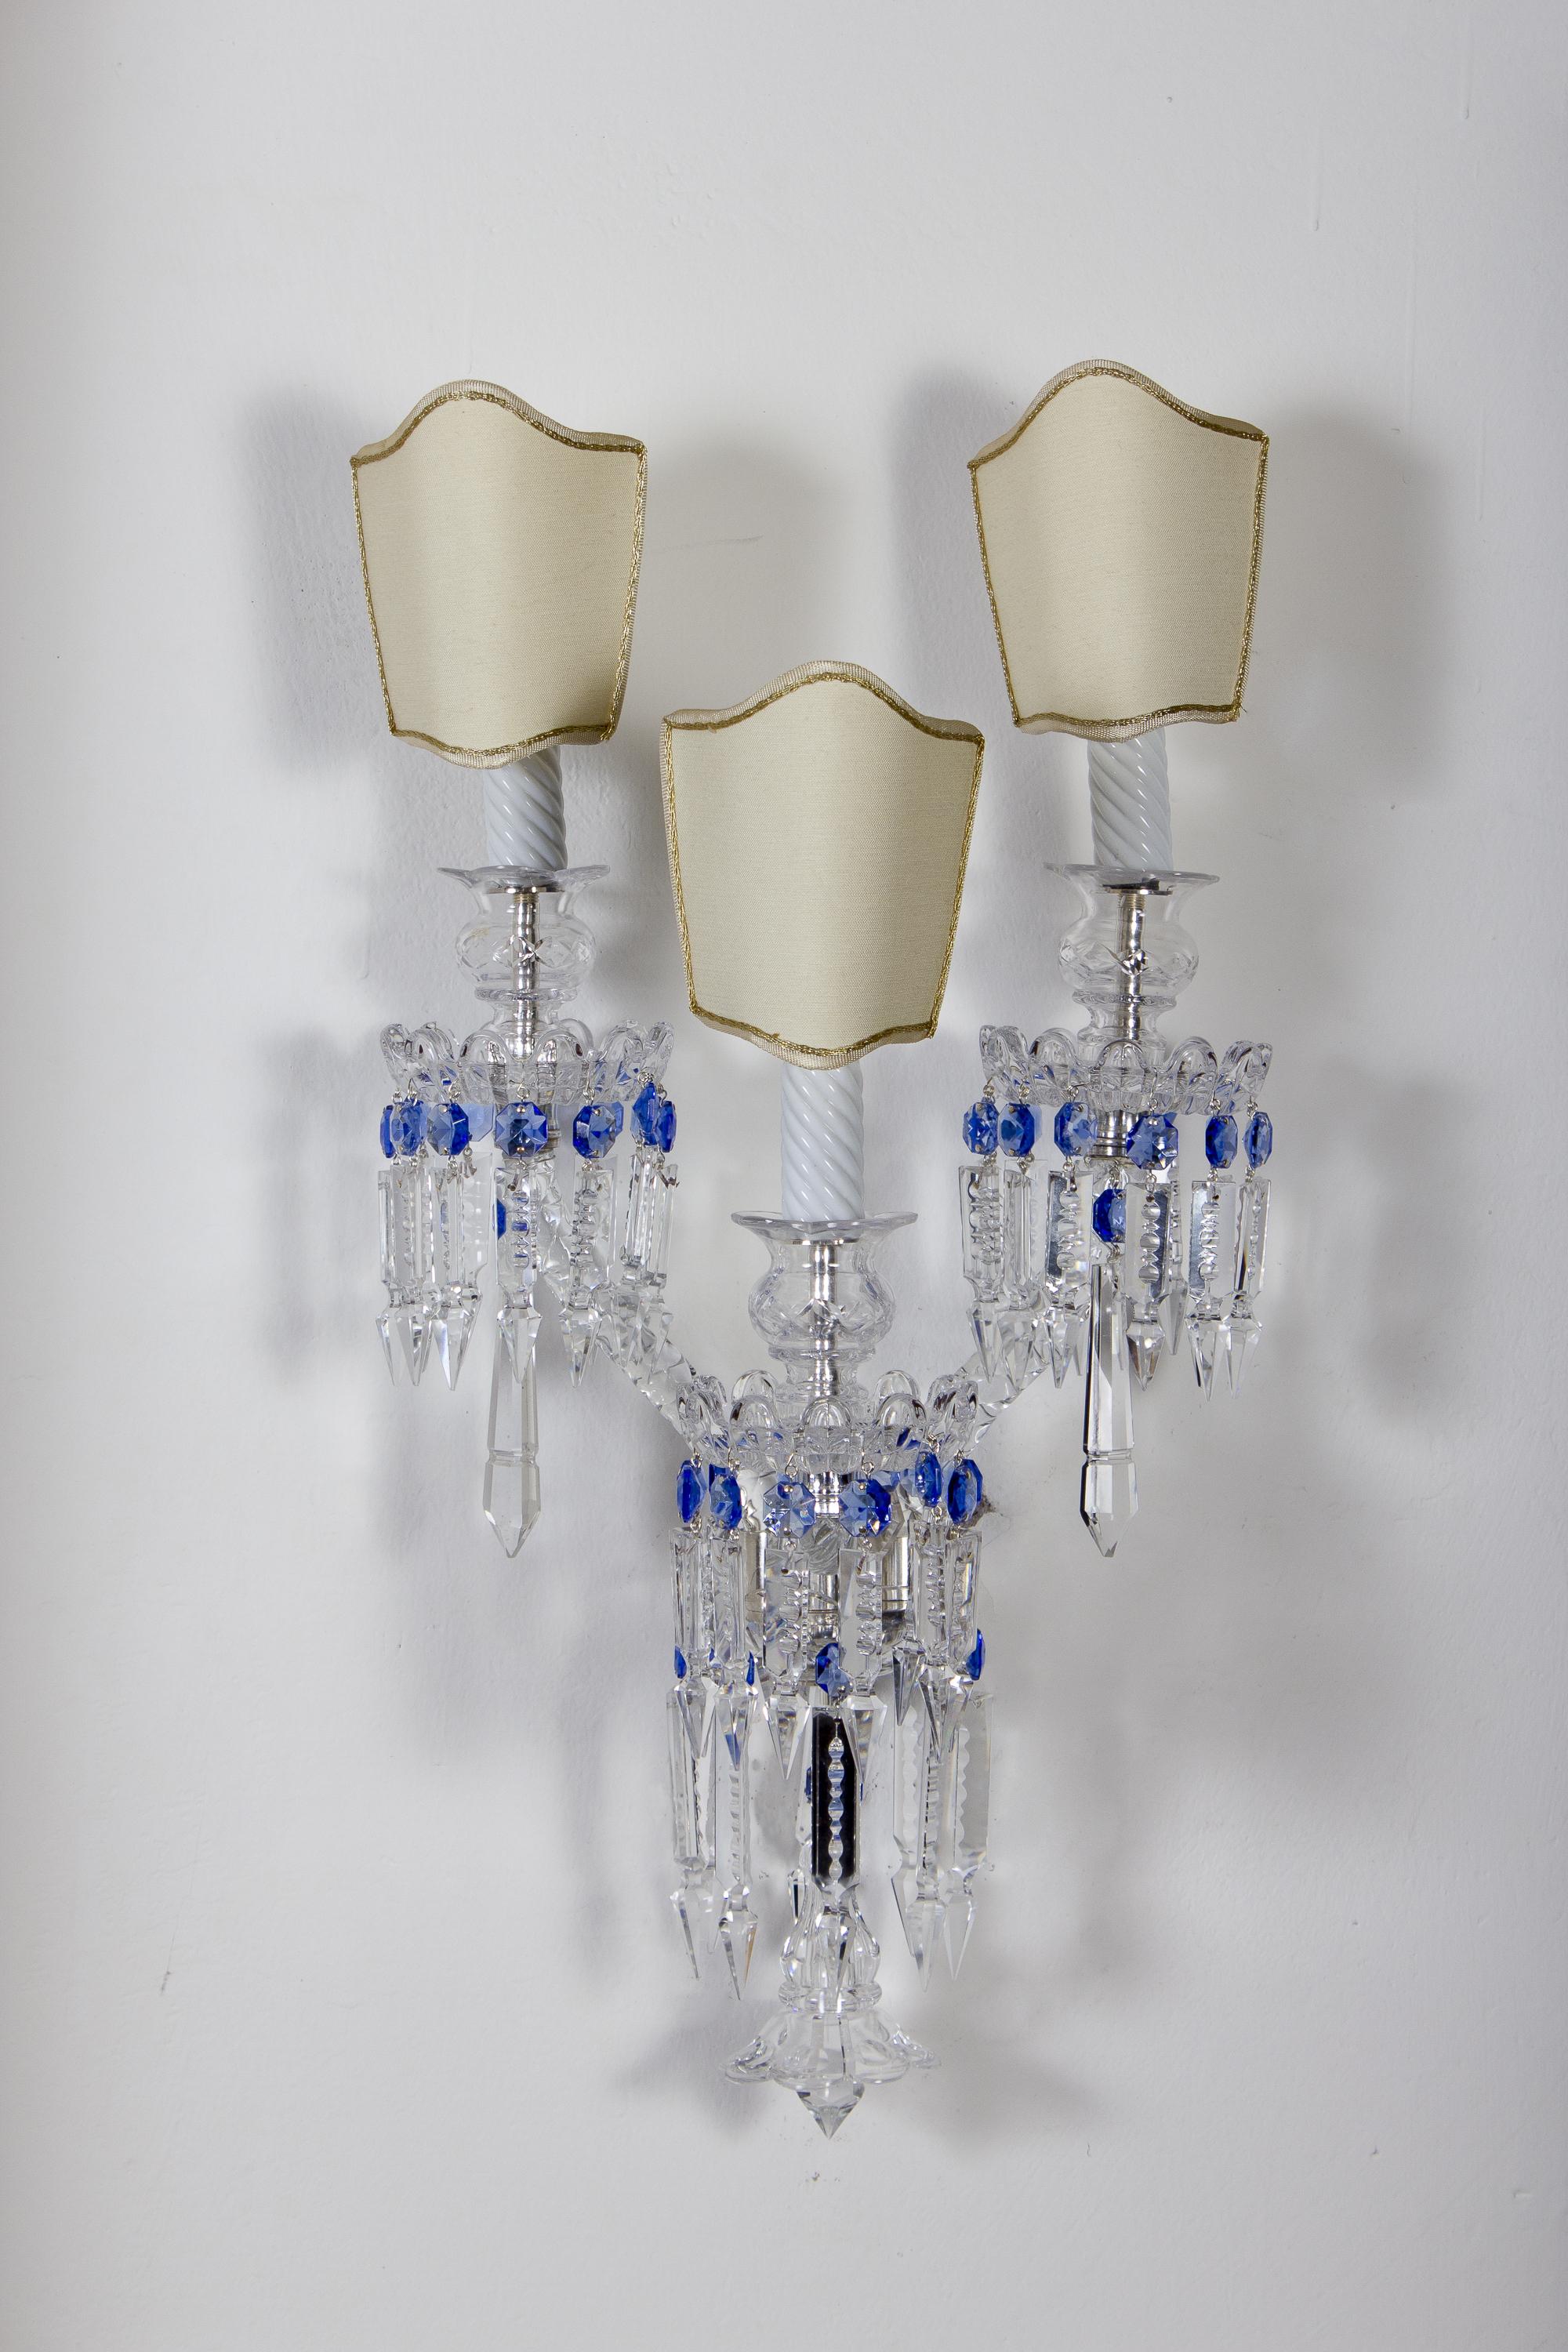 Pair of elegant sconces each with five candleholders.